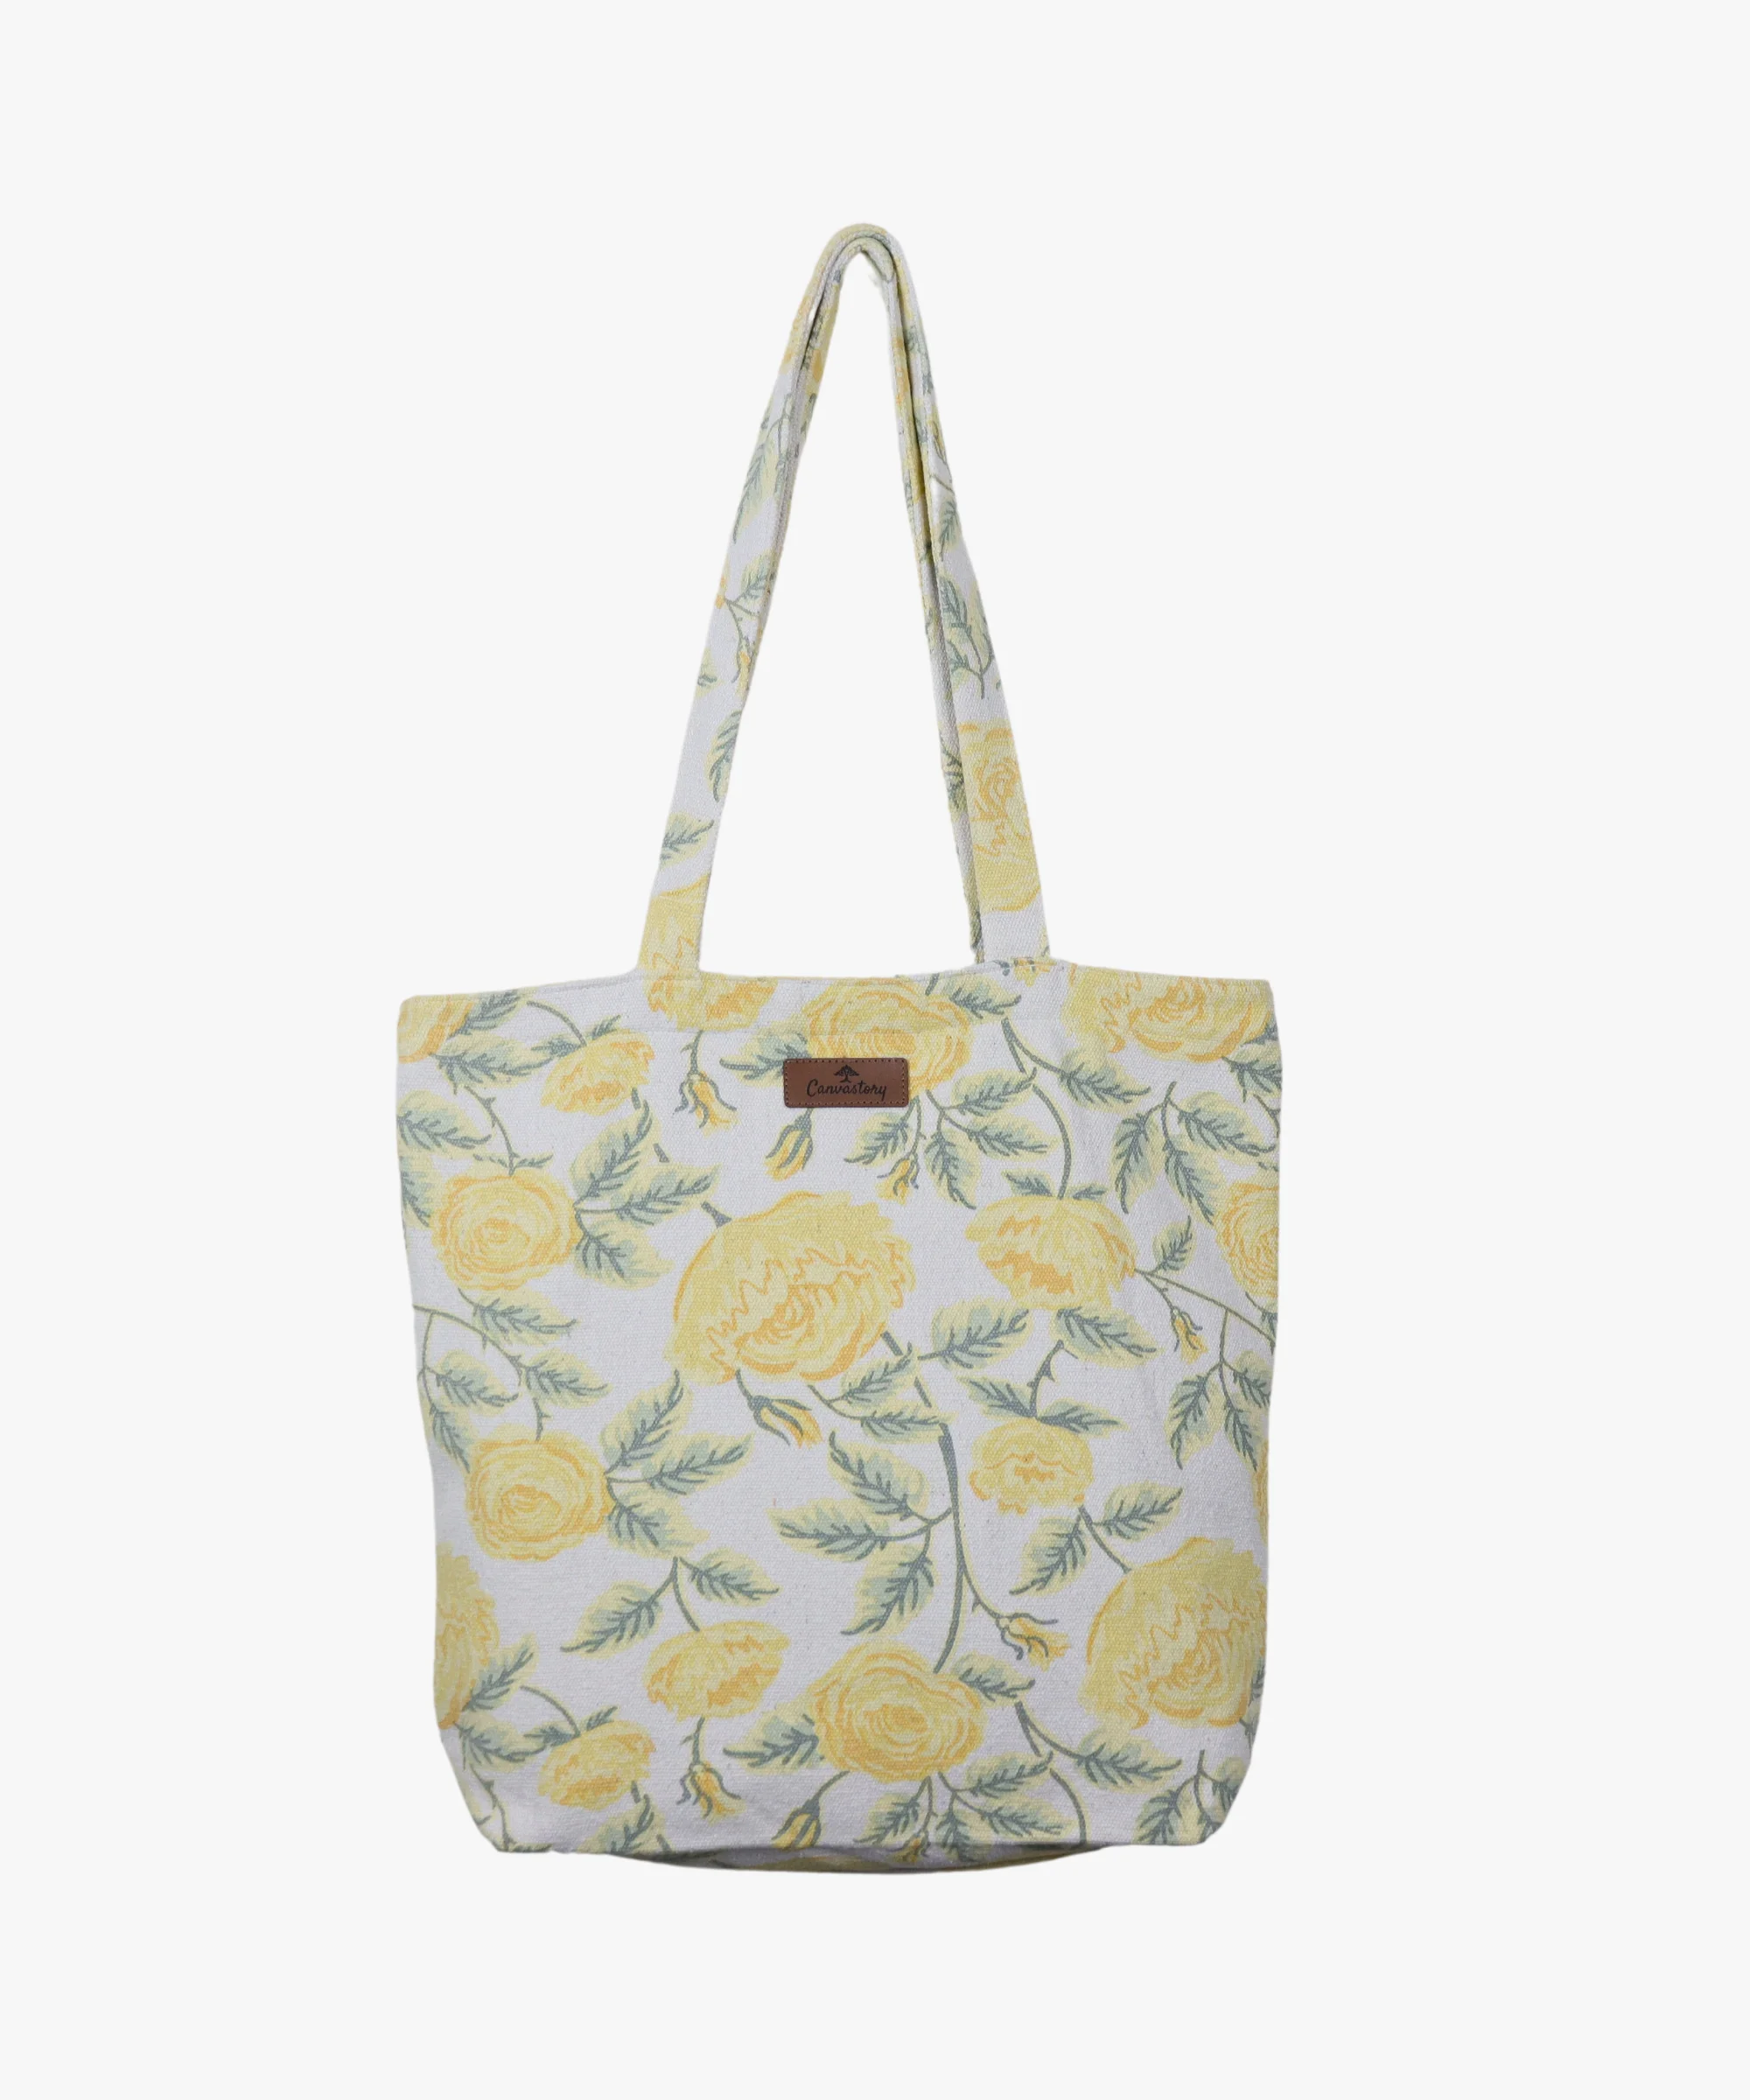 Buy Crazy Corner Beach Flowers Printed Canvas Fatty Tote Bags Online